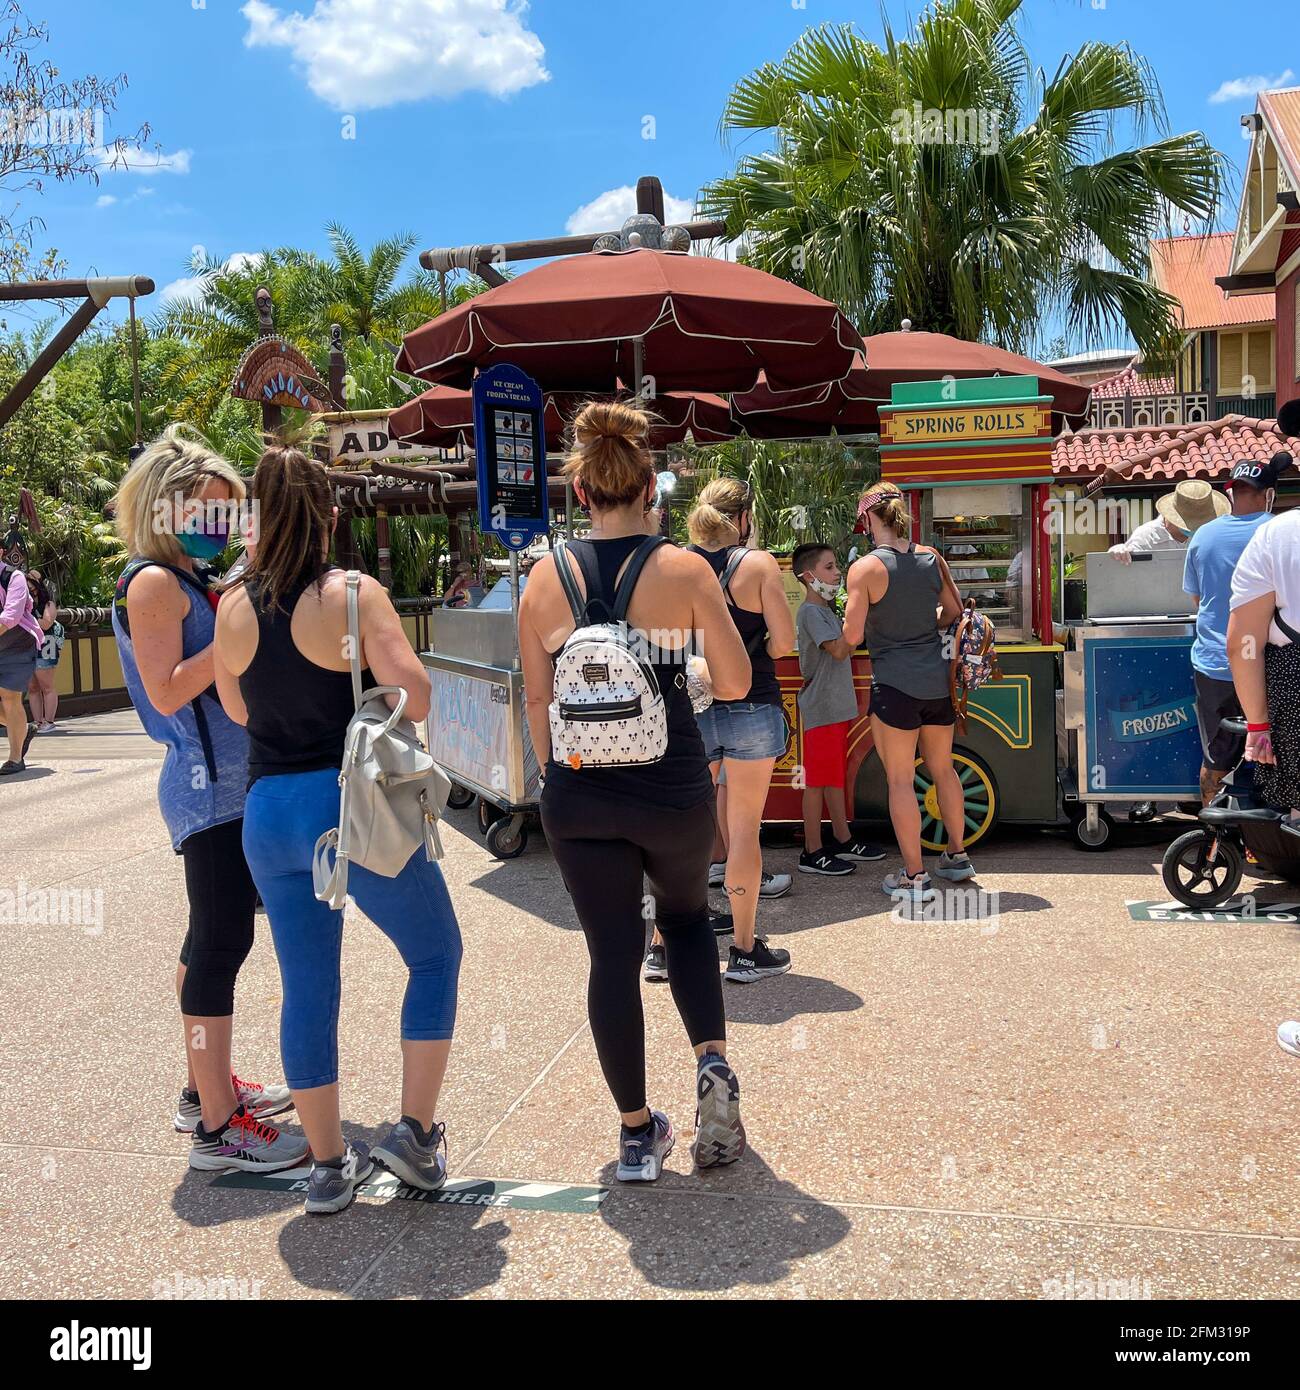 Orlando, FL USA - May 2, 2021:  People waiting in line to buy Cheeseburger and Pepperoni Spring Rolls from a food cart at Disney World Magic Kingdom. Stock Photo